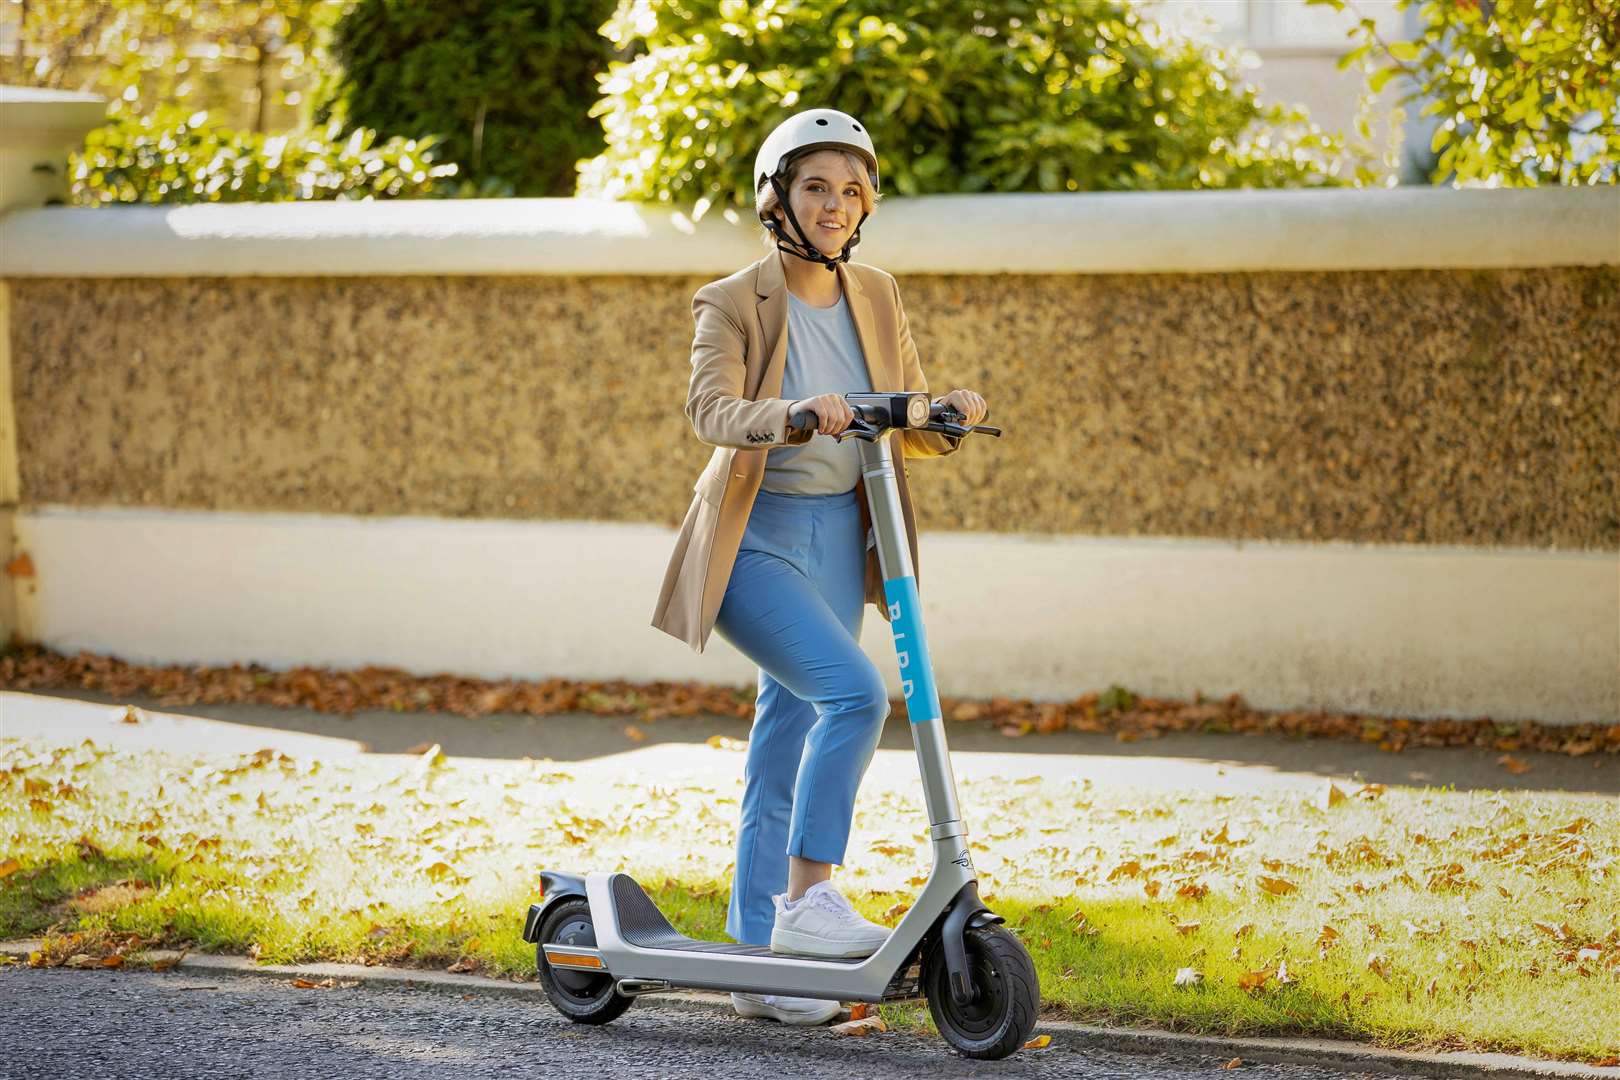 The 'cobble-proof' Bird Three e-scooter will be launched in Canterbury next week